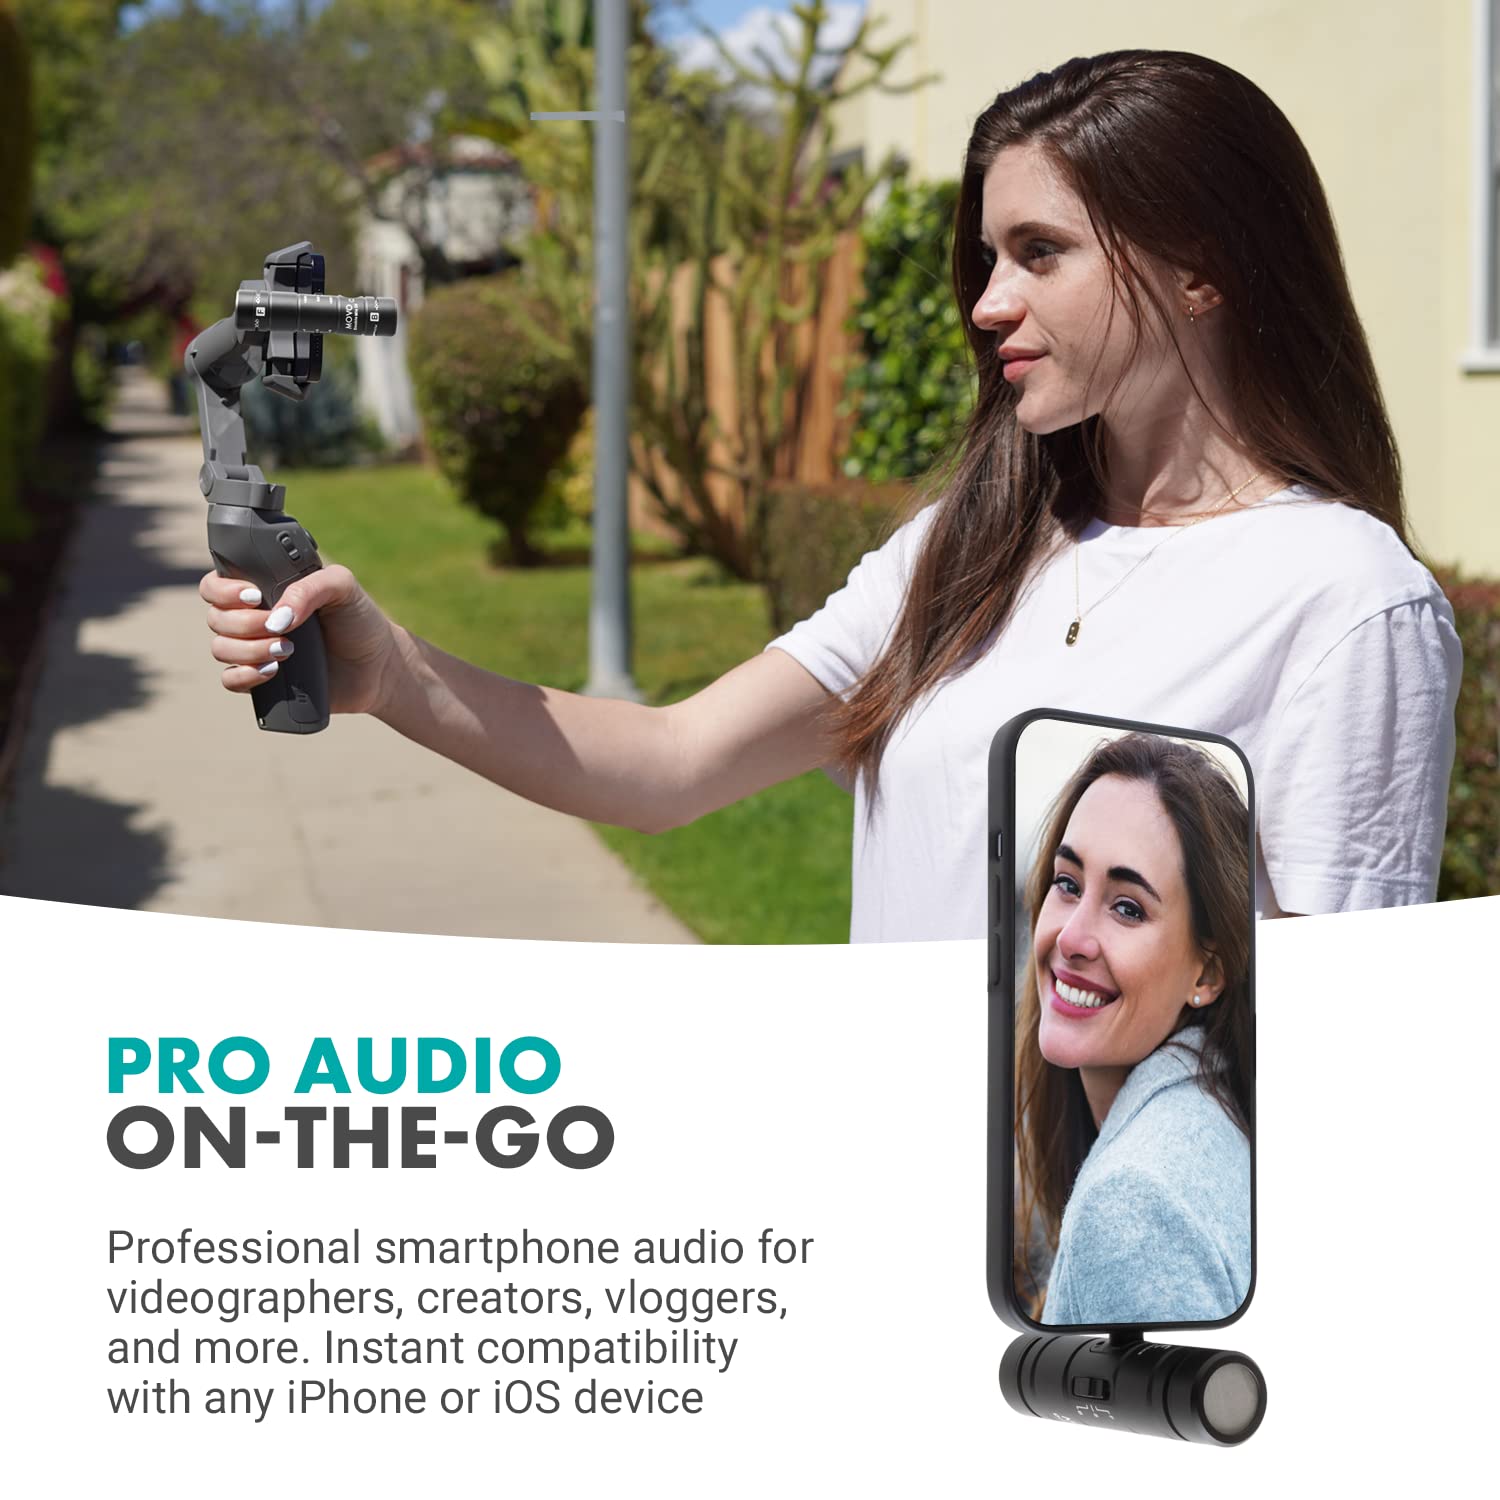 Movo DoubleMic-DI Dual Capsule Microphone for iPhone- Two-Sided Cardioid Condenser iPhone Microphone for Video Recording- Professional Microphone for iPhone, iPad, iOS- Apple Lightning MFi Certified  - Good